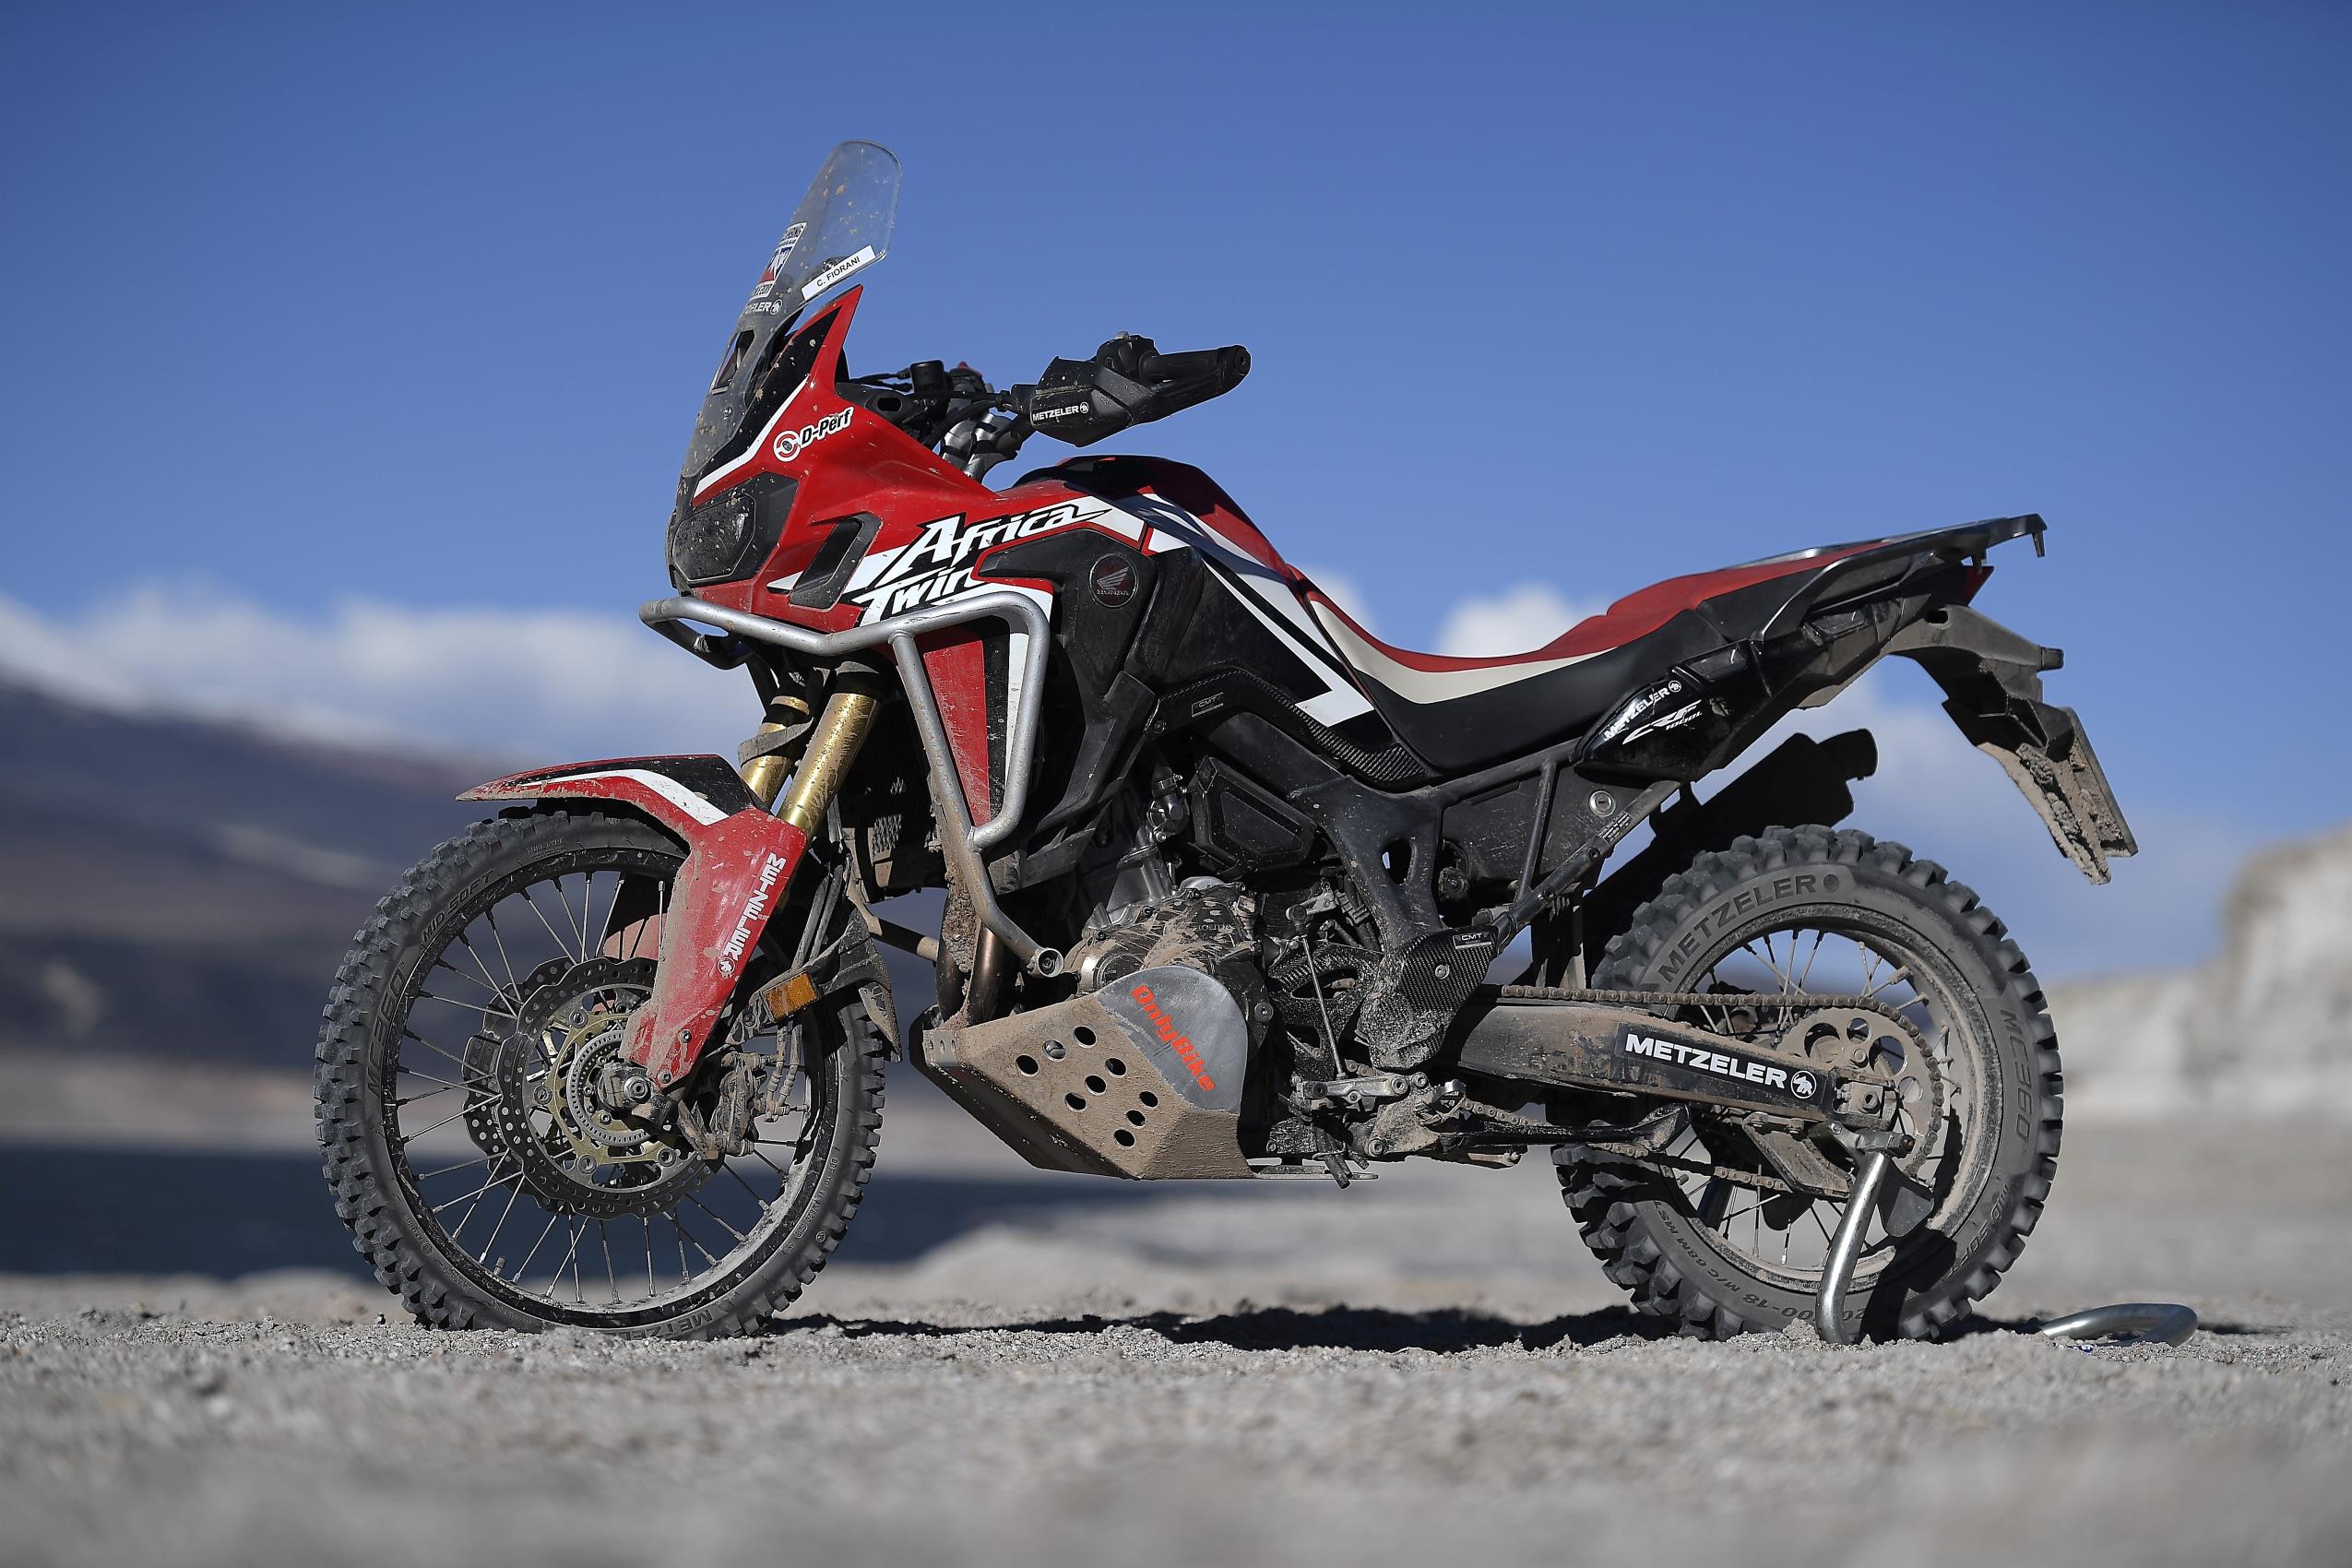 Honda Africa Twin Achieves The Impossible2550 x 1700